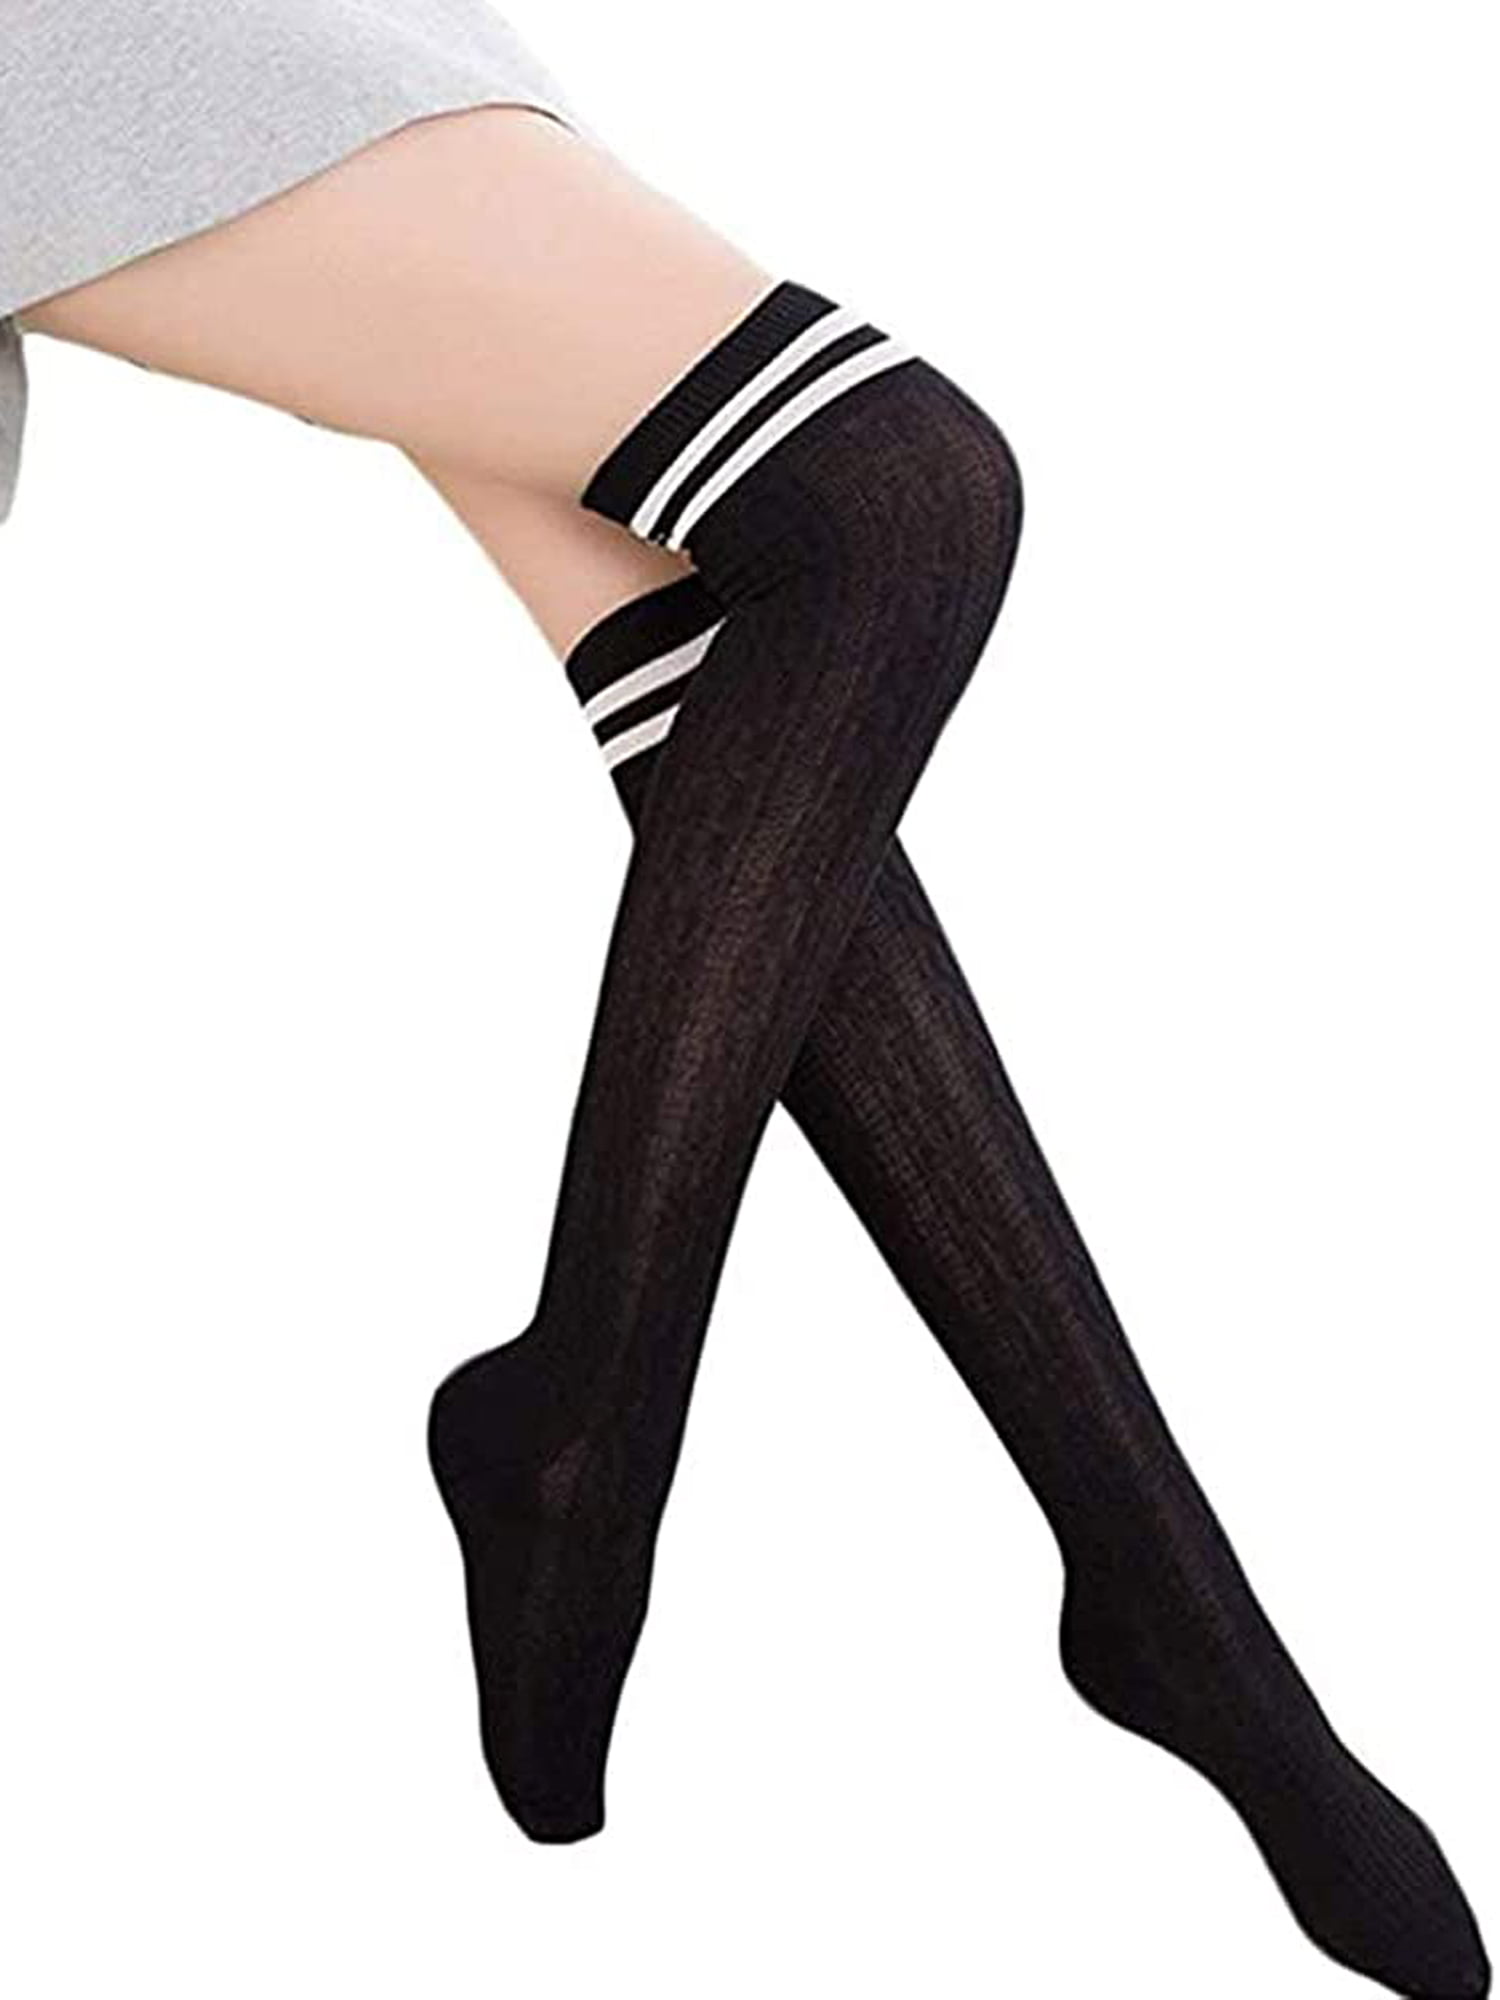 Xingqing Women Knit Cotton Over The Knee Long Socks Striped Thigh High ...